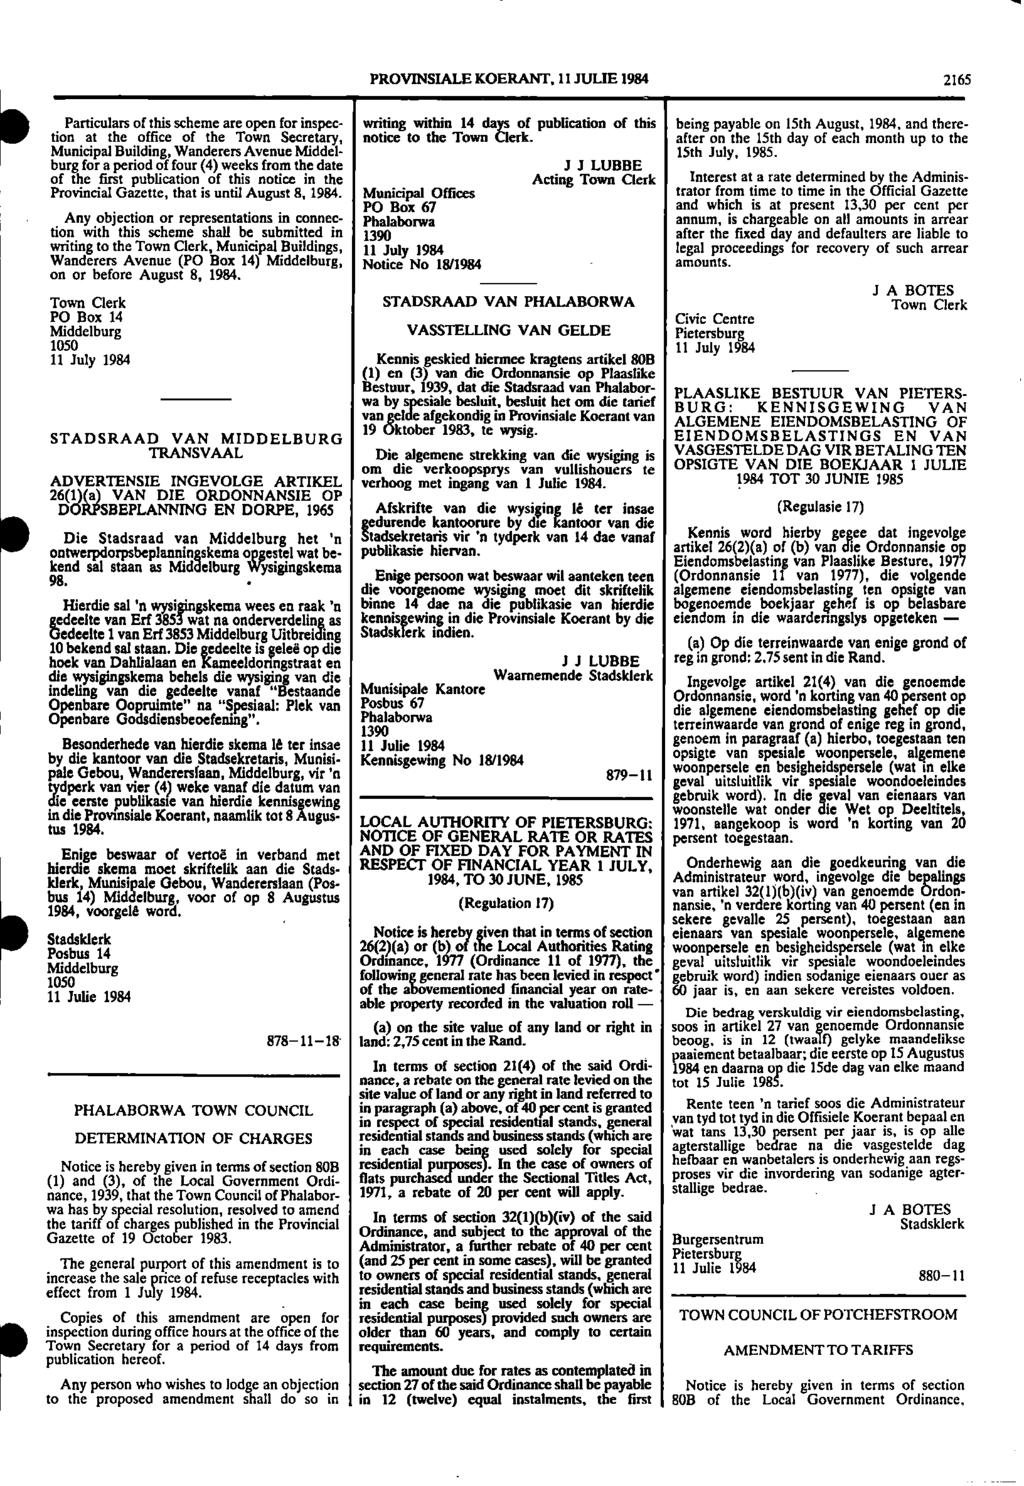 PROVINSIALE KOERANT 11 JULIE 1984 2165 Particulars of this scheme are open for inspec writing within 14 days of publication of this being payable on 15th August 1984 and theretion at the office of